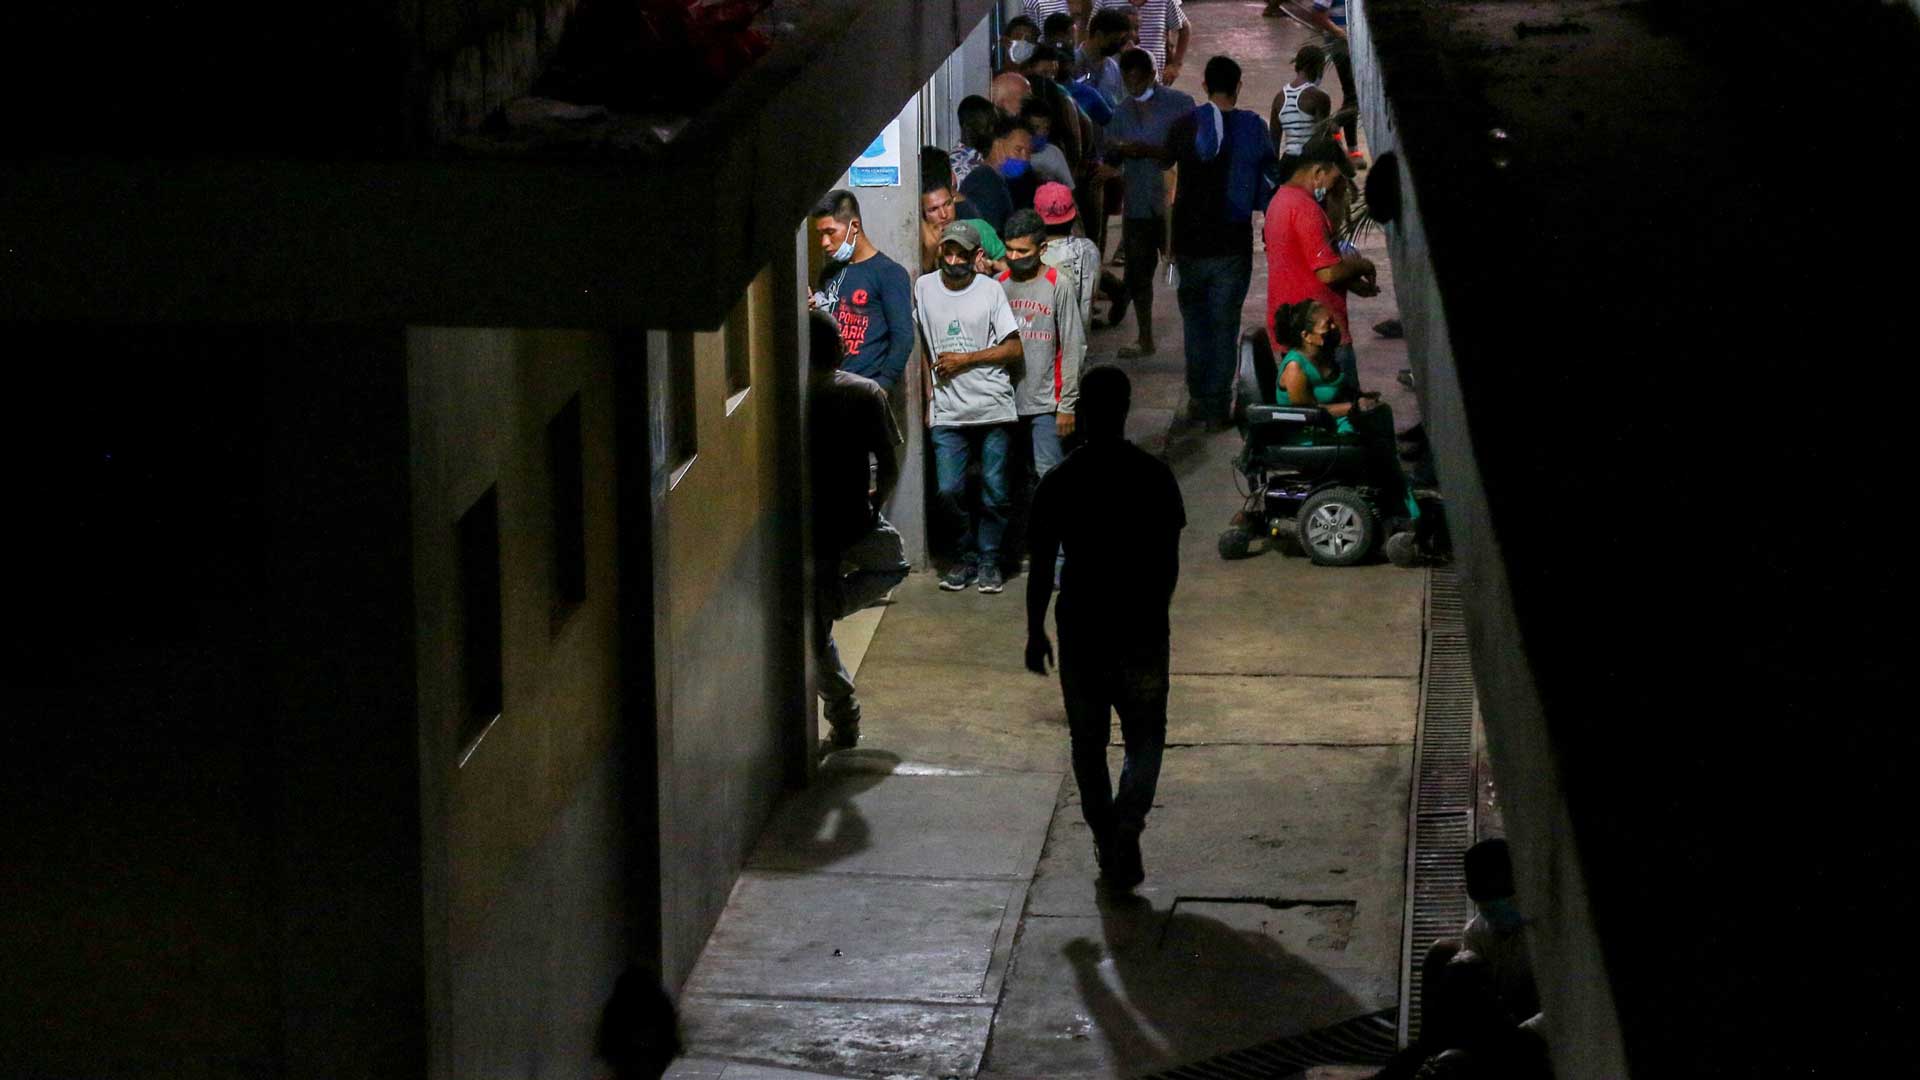 Migrants staying at Jesús el Buen Pastor, a migrant shelter in Tapachula, Mexico, line up for a free meal of black beans and tortillas on March 8, 2022. Guests are not allowed to bring food or drinks into the shelter and can’t take meals to go. Although migrants here have a roof, free meals and a mat or bed to sleep on, they must follow certain rules to stay.